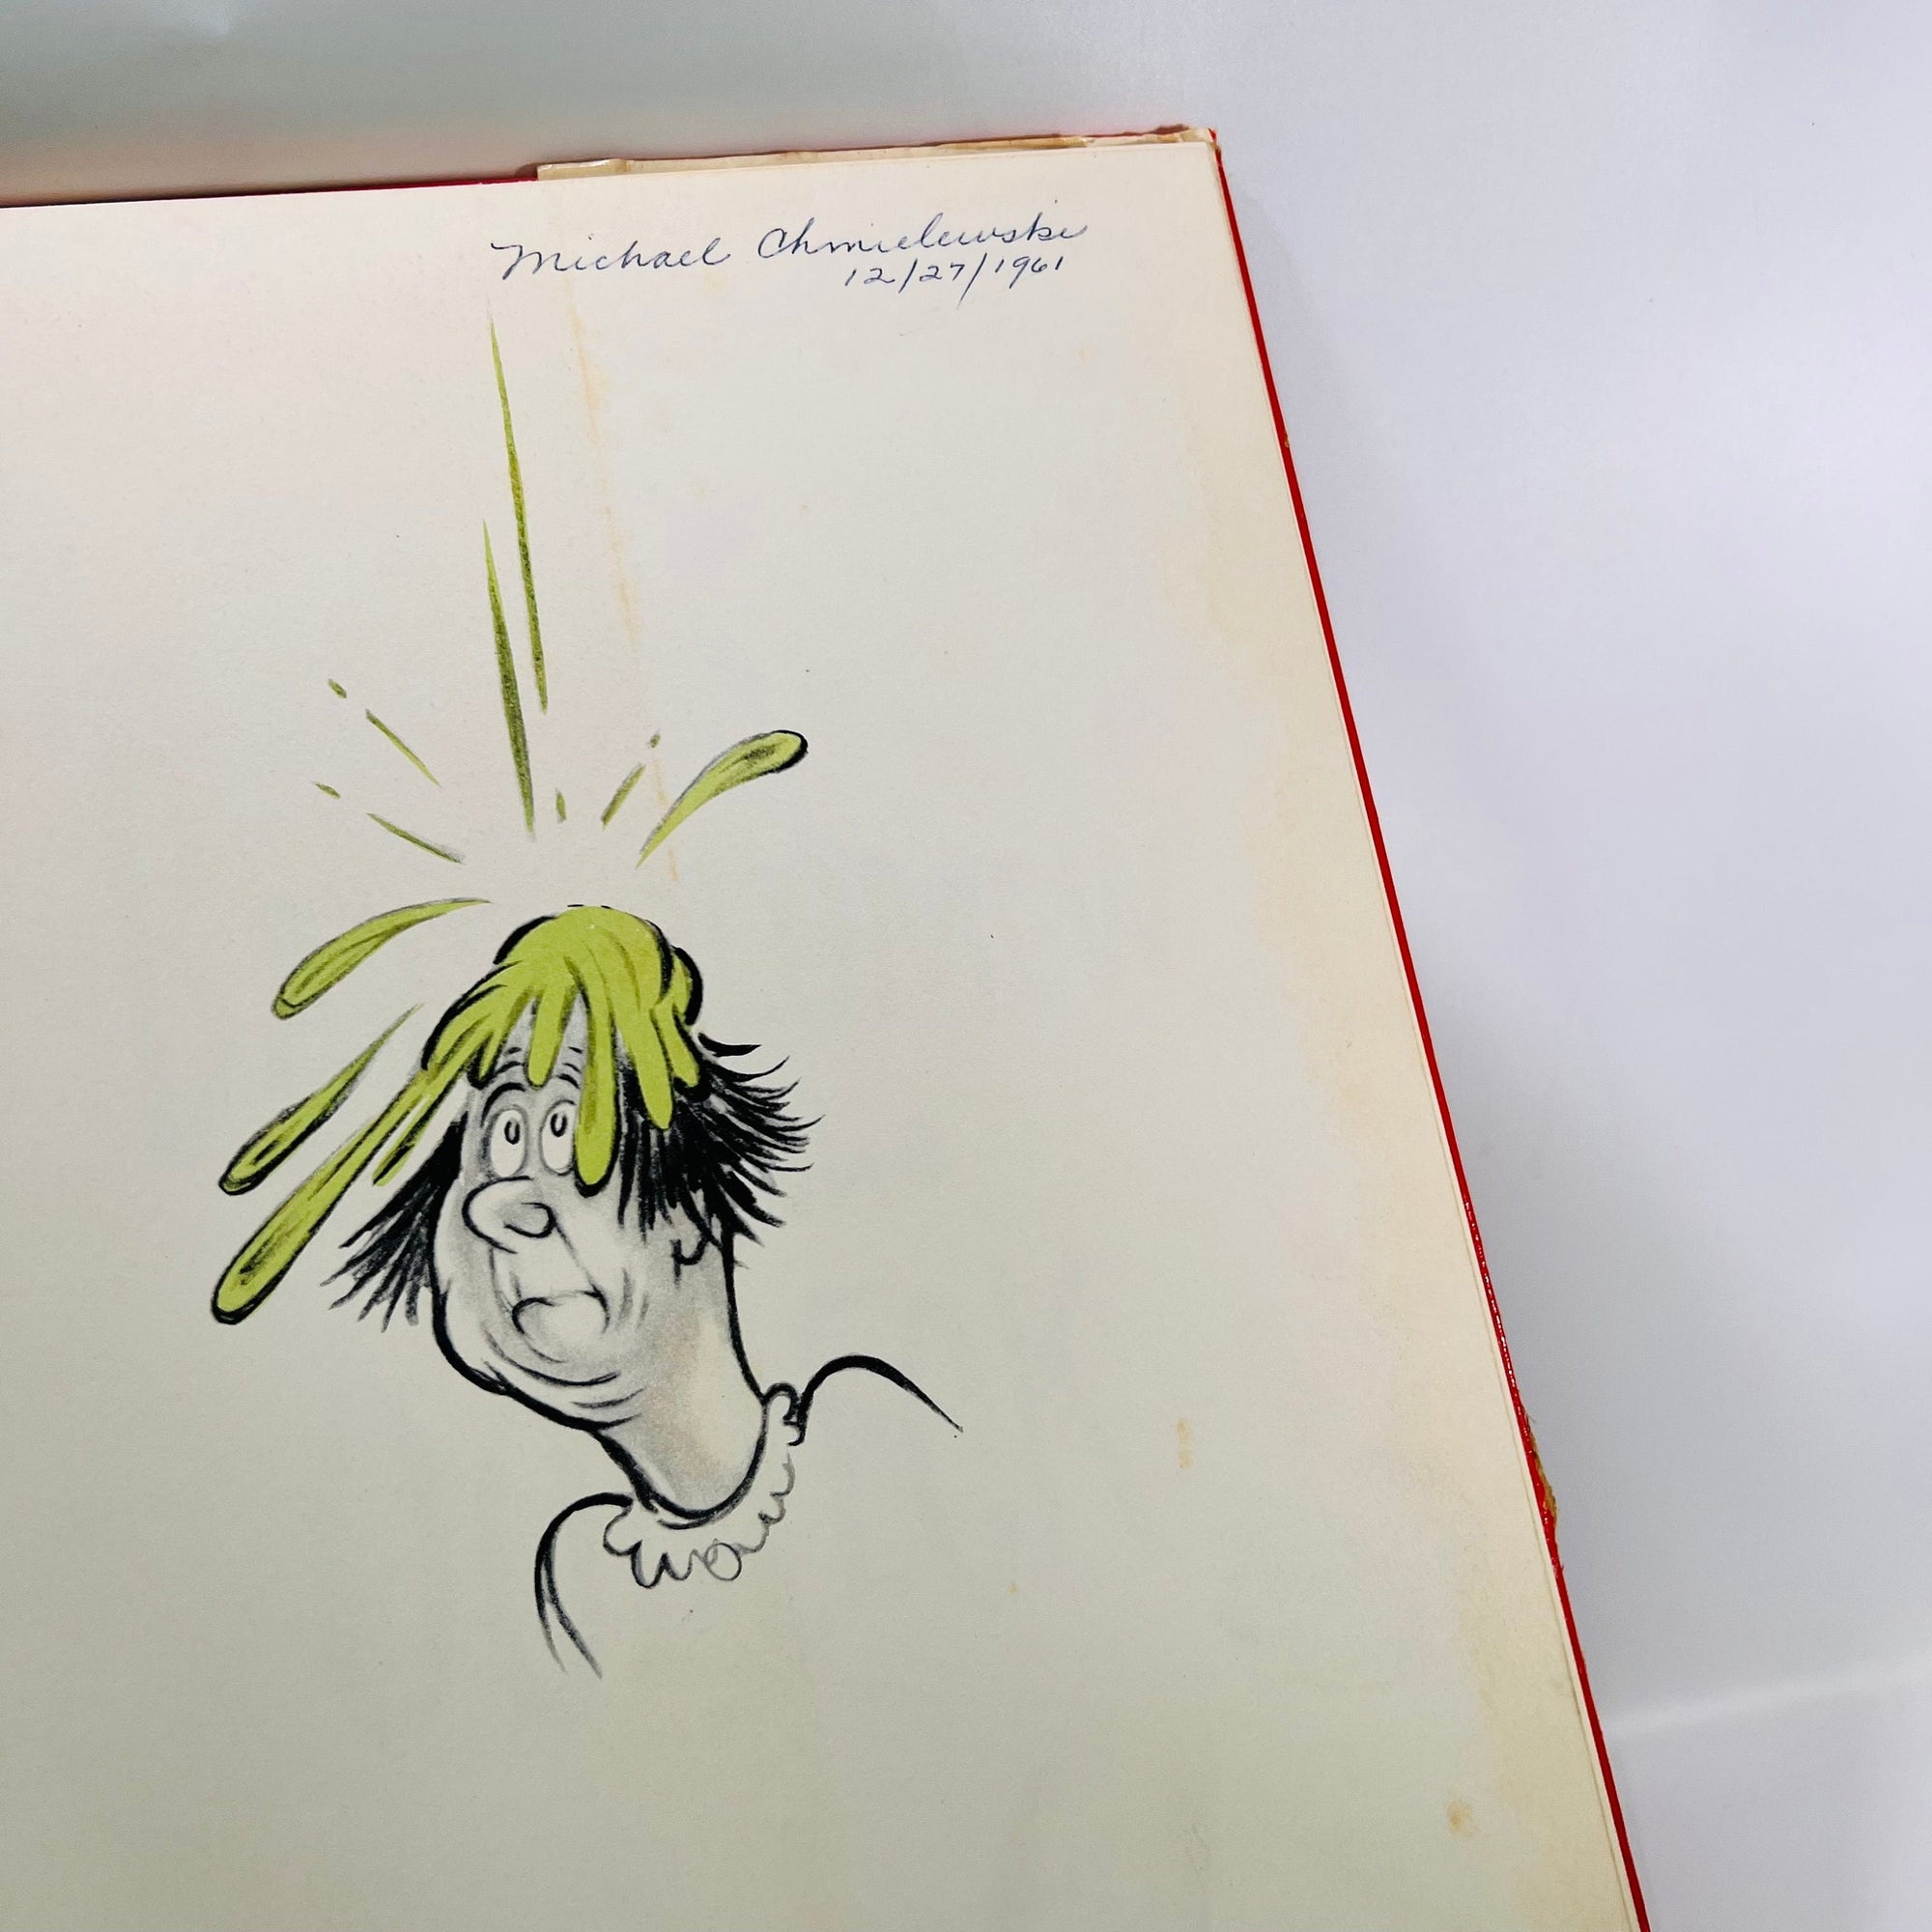 Bartholomew and the Oobleck by Dr. Seuss 1949 Random House, IncVintage Book